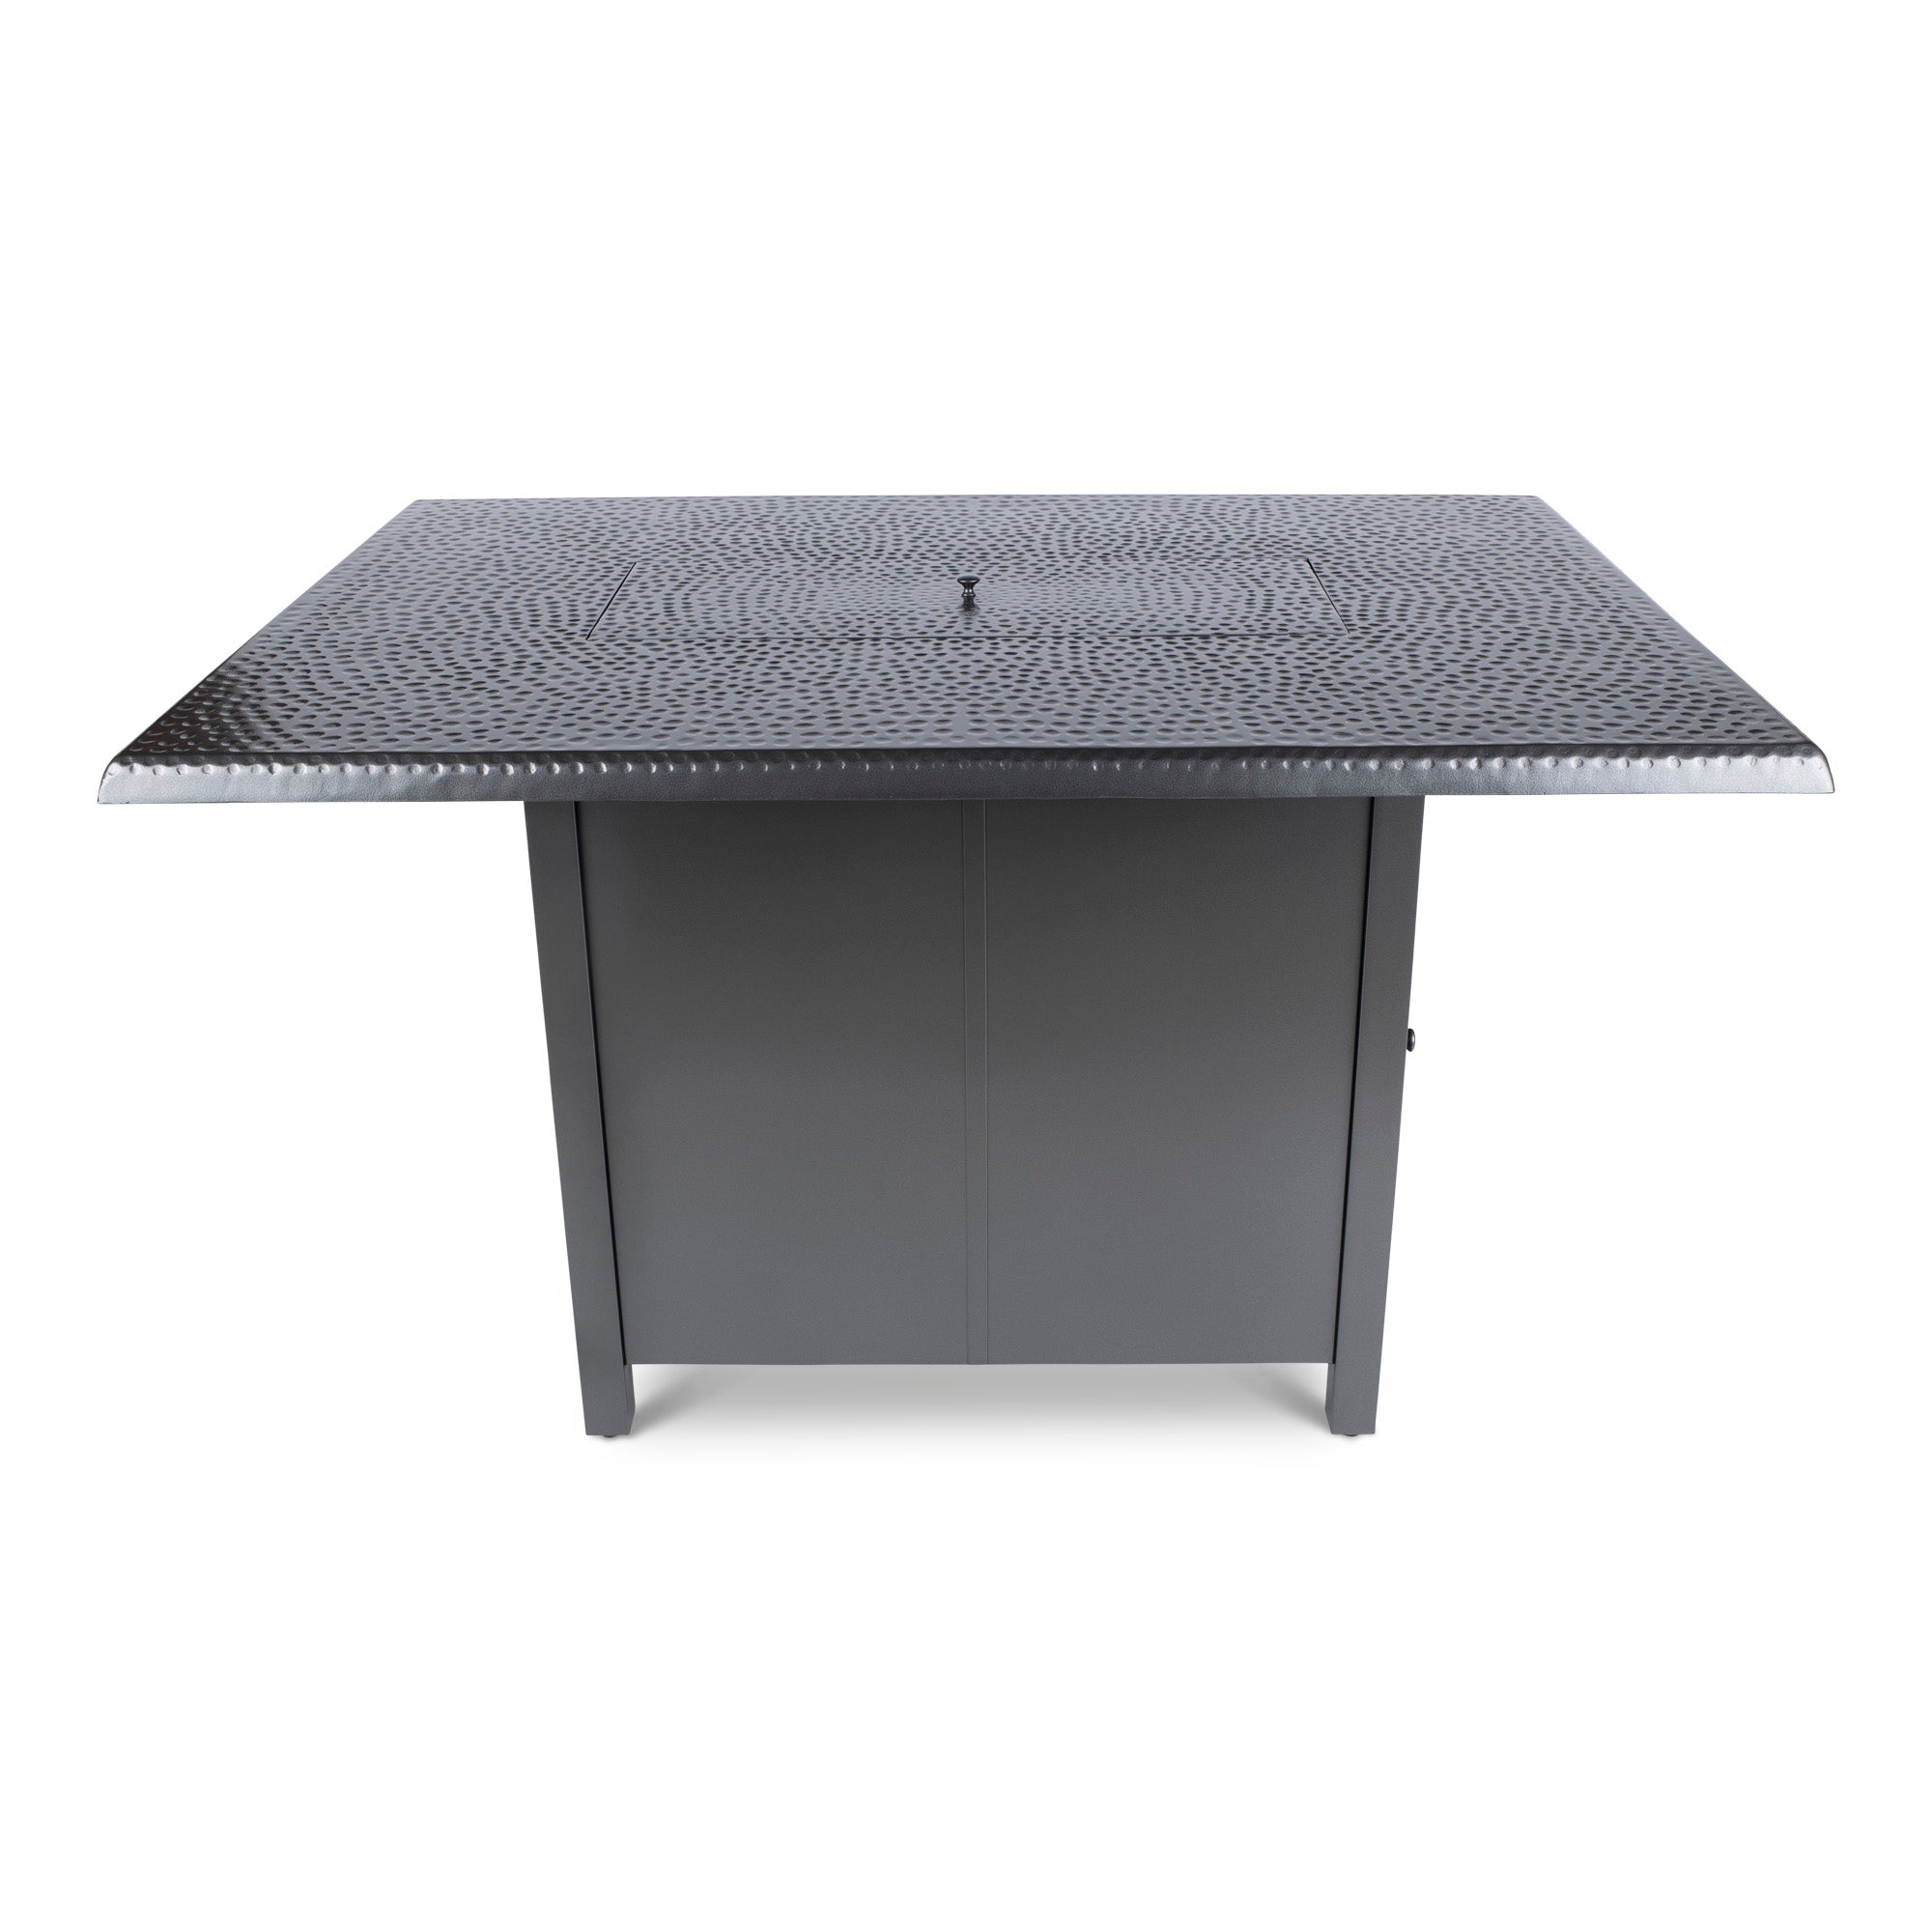 Woodard 42 inch x 60 inch Hammered Top Counter Height Fire Table in Pewter 12037586